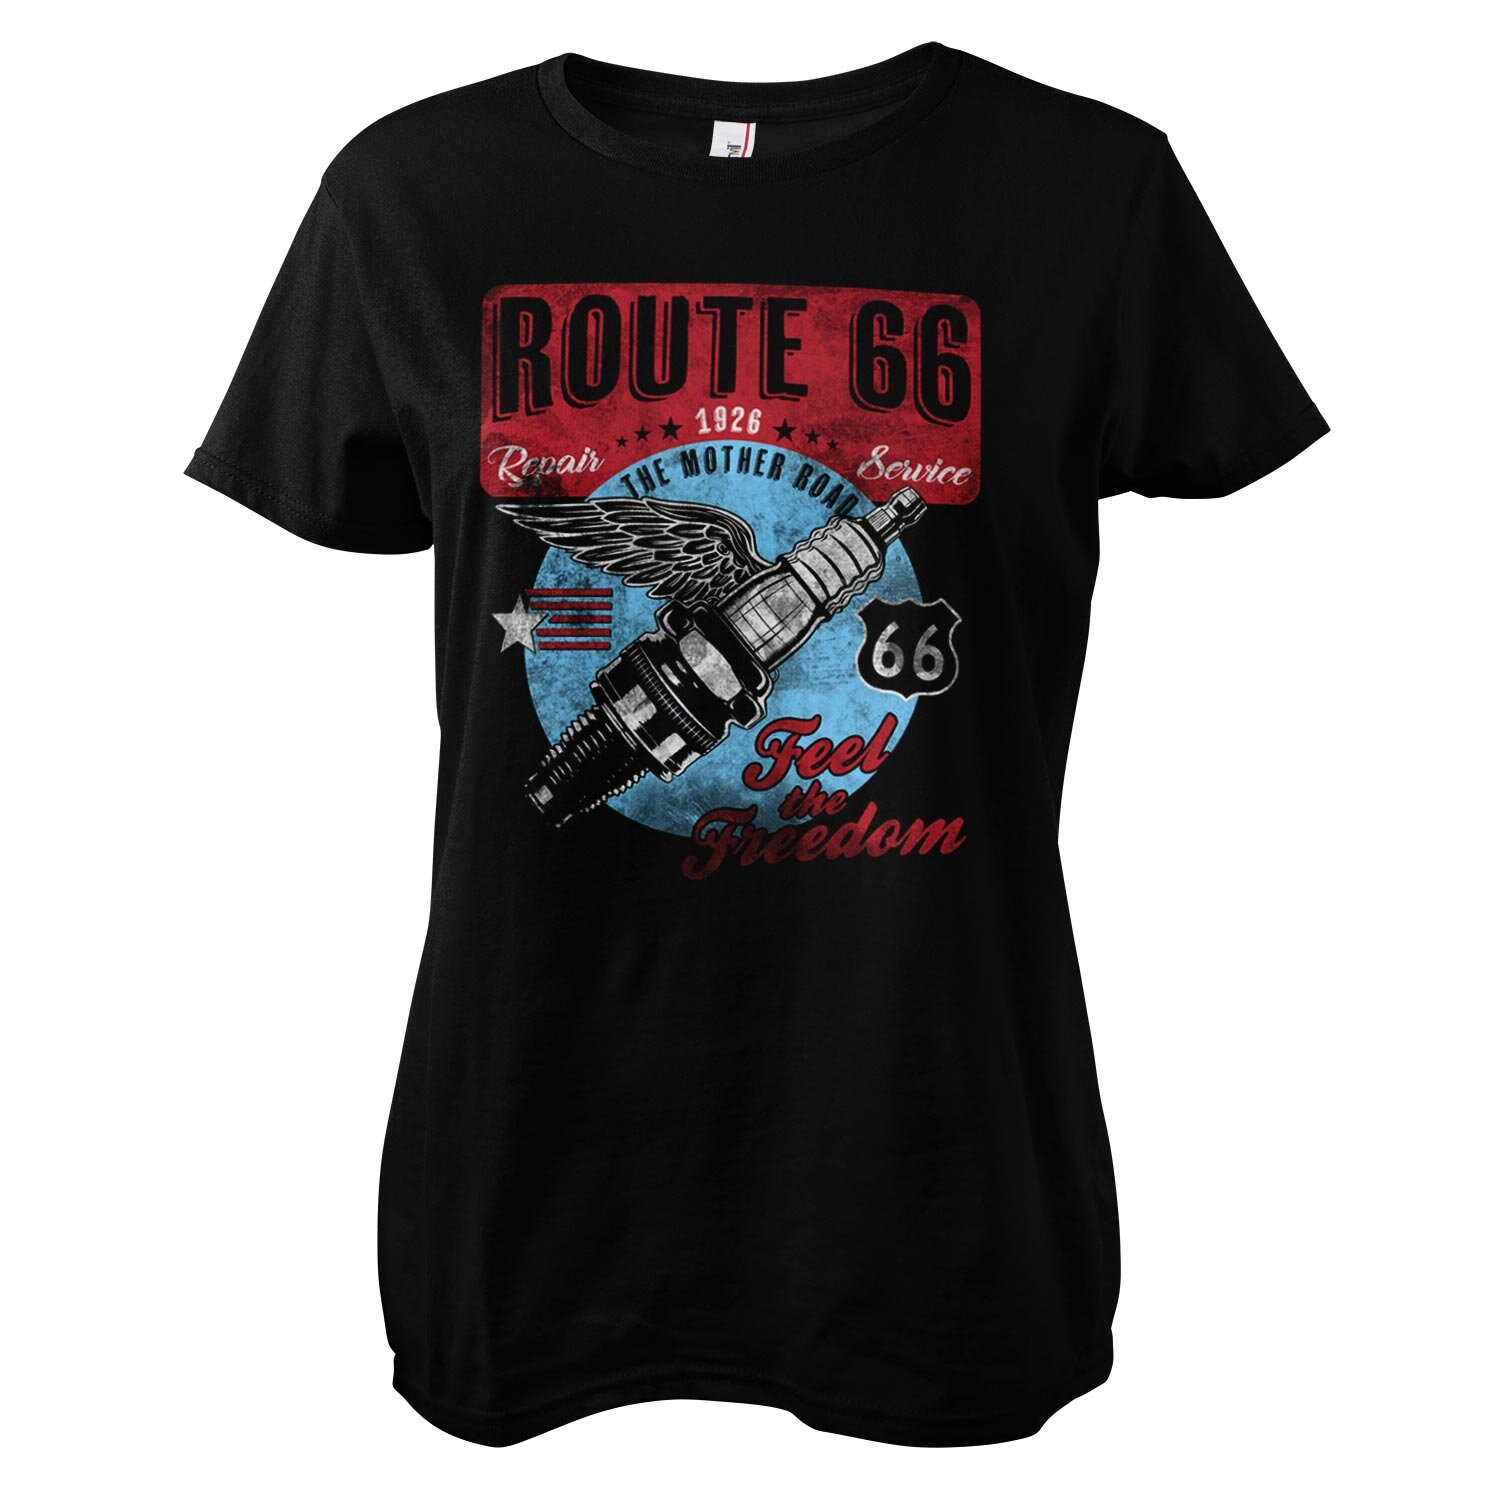 Route 66 Vintage Spark Girly Tee